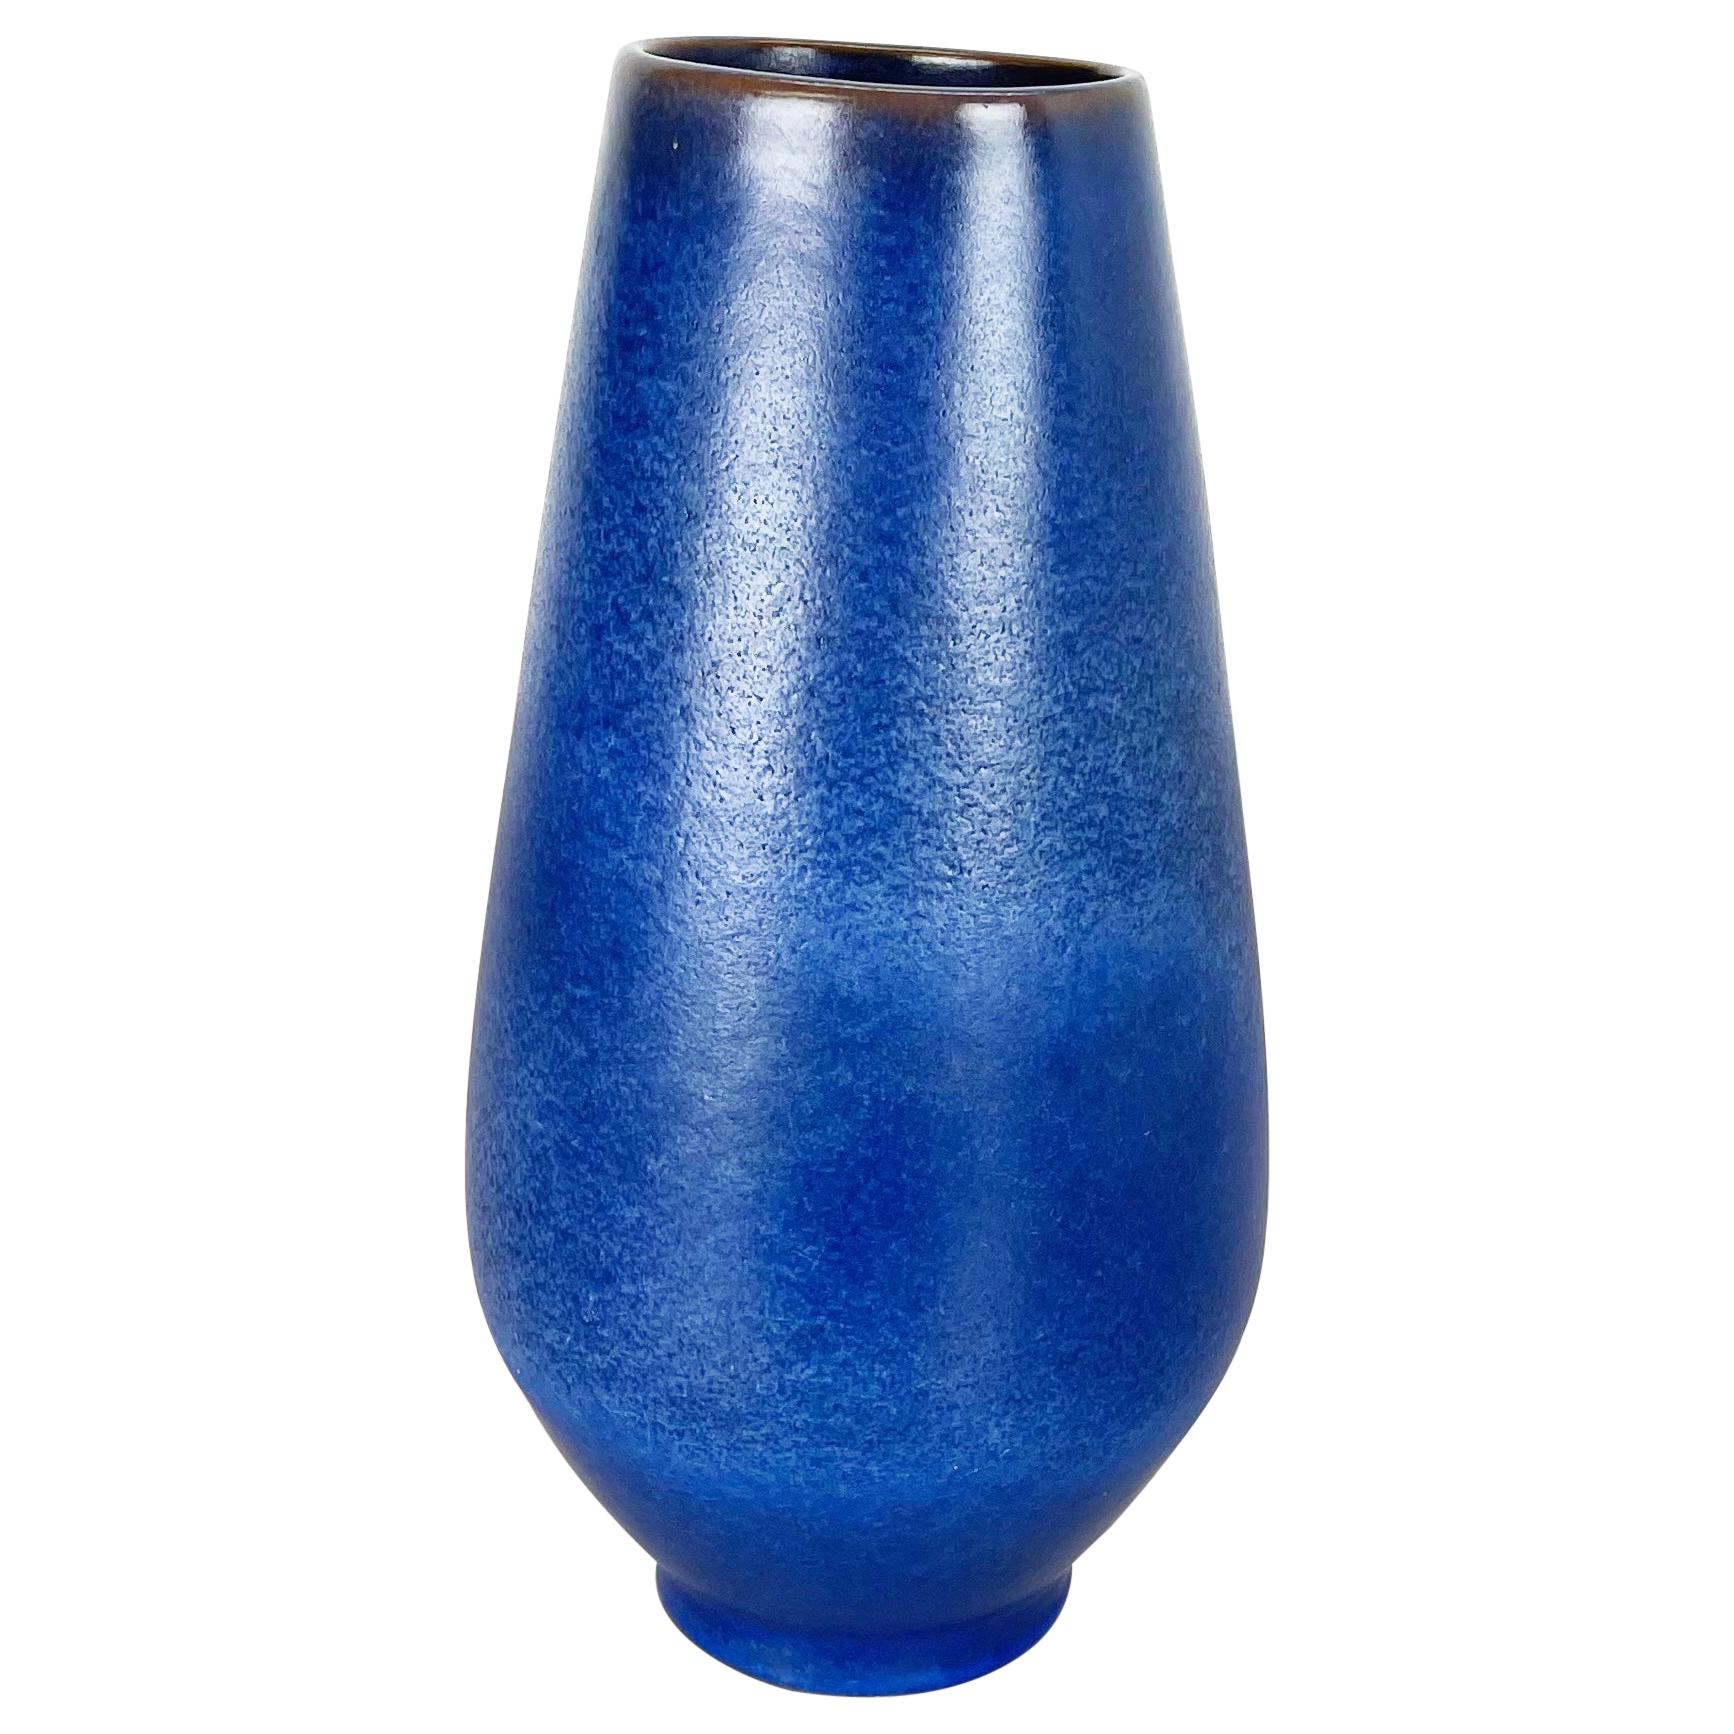 Colorful Abstract Ceramic Pottery Vase by Karlsruher Majolika, Germany, 1950s